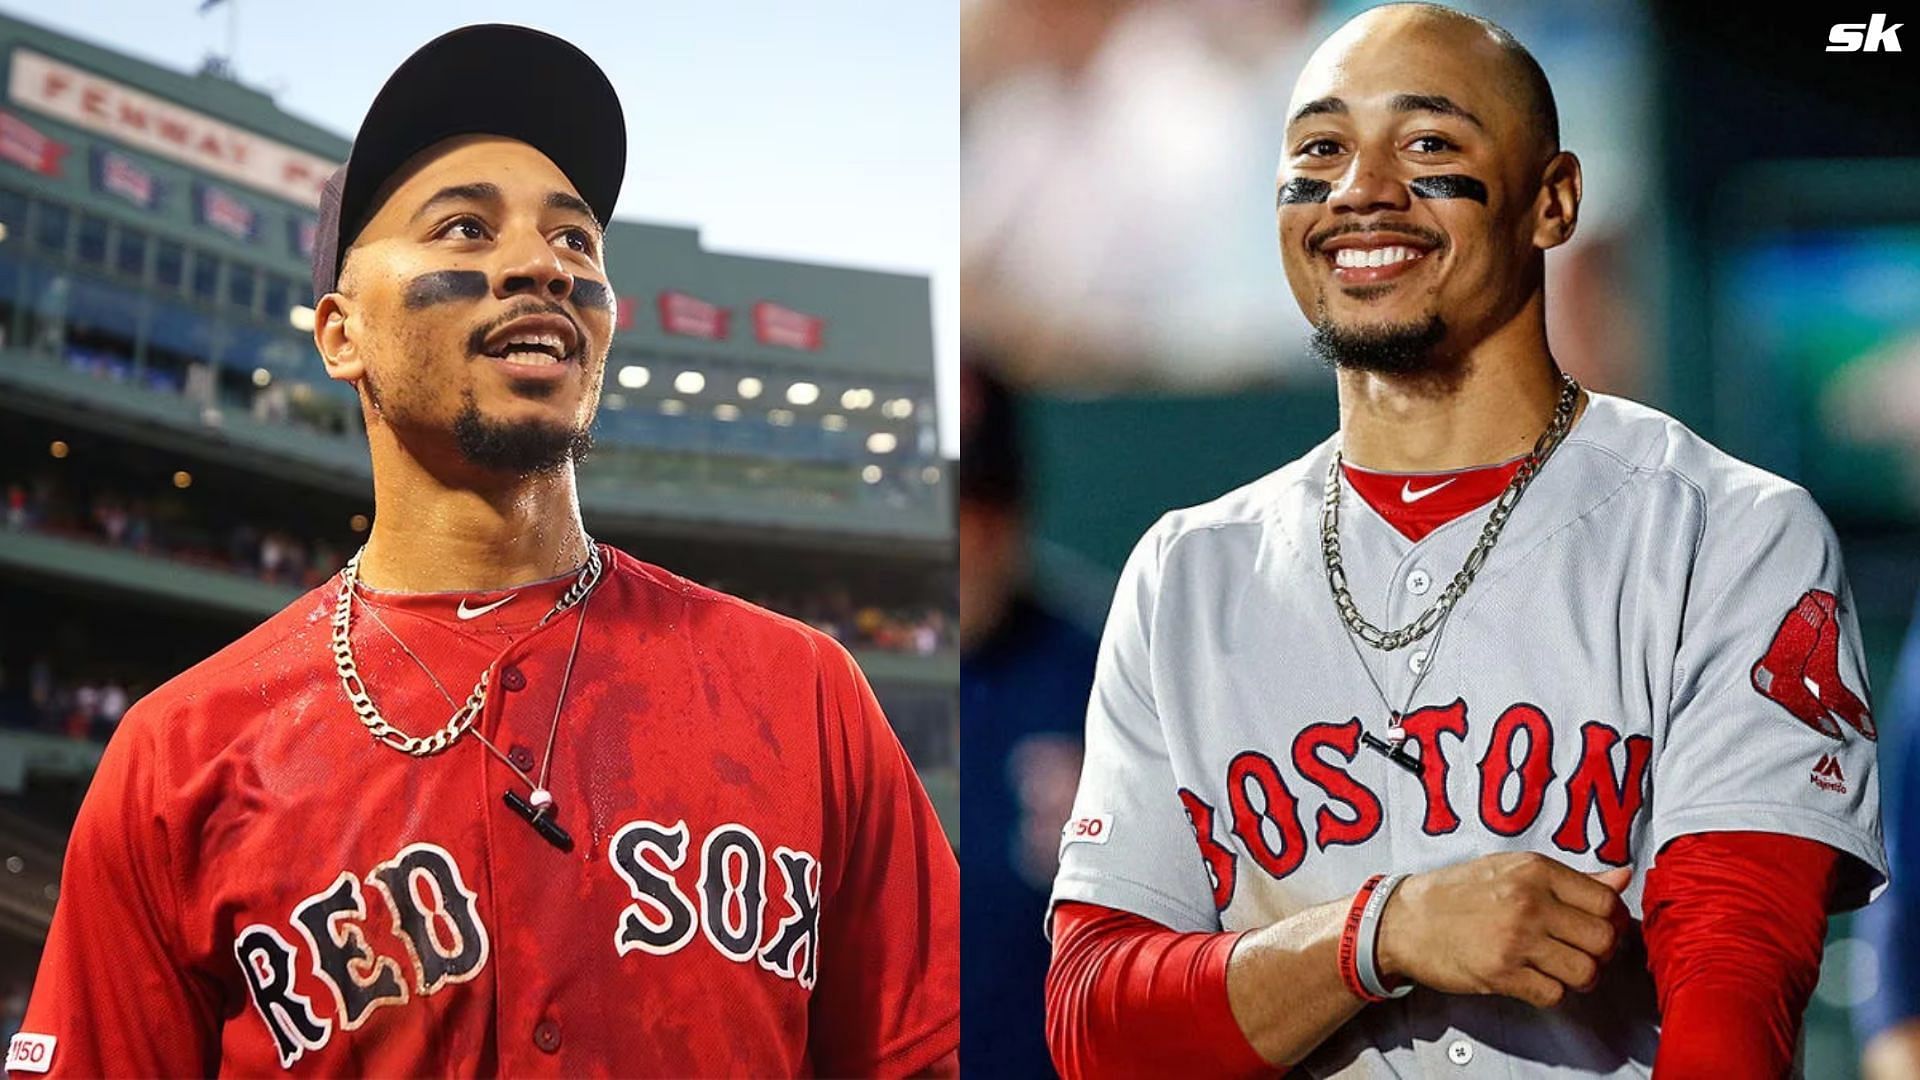 Mookie Betts opens up about the Red Sox sign-stealing allegations